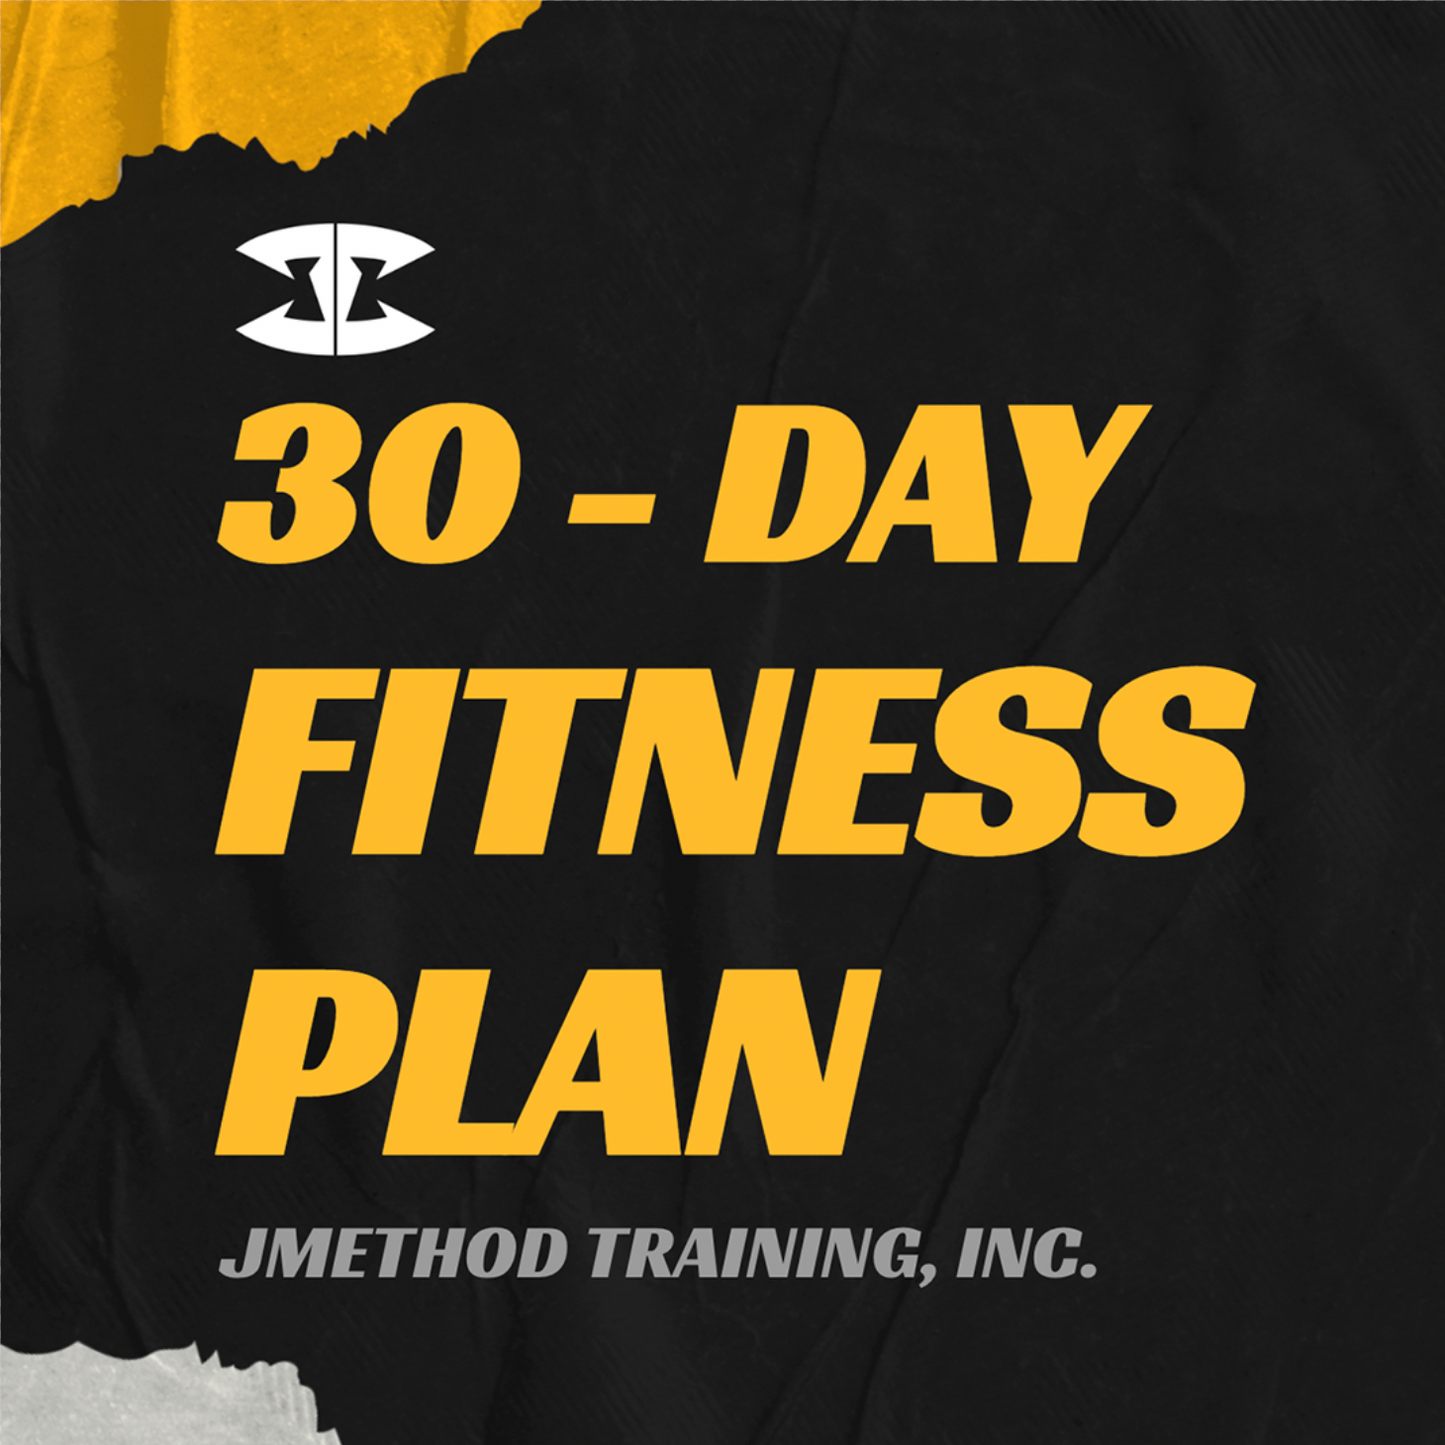 30-DAY FITNESS PLAN